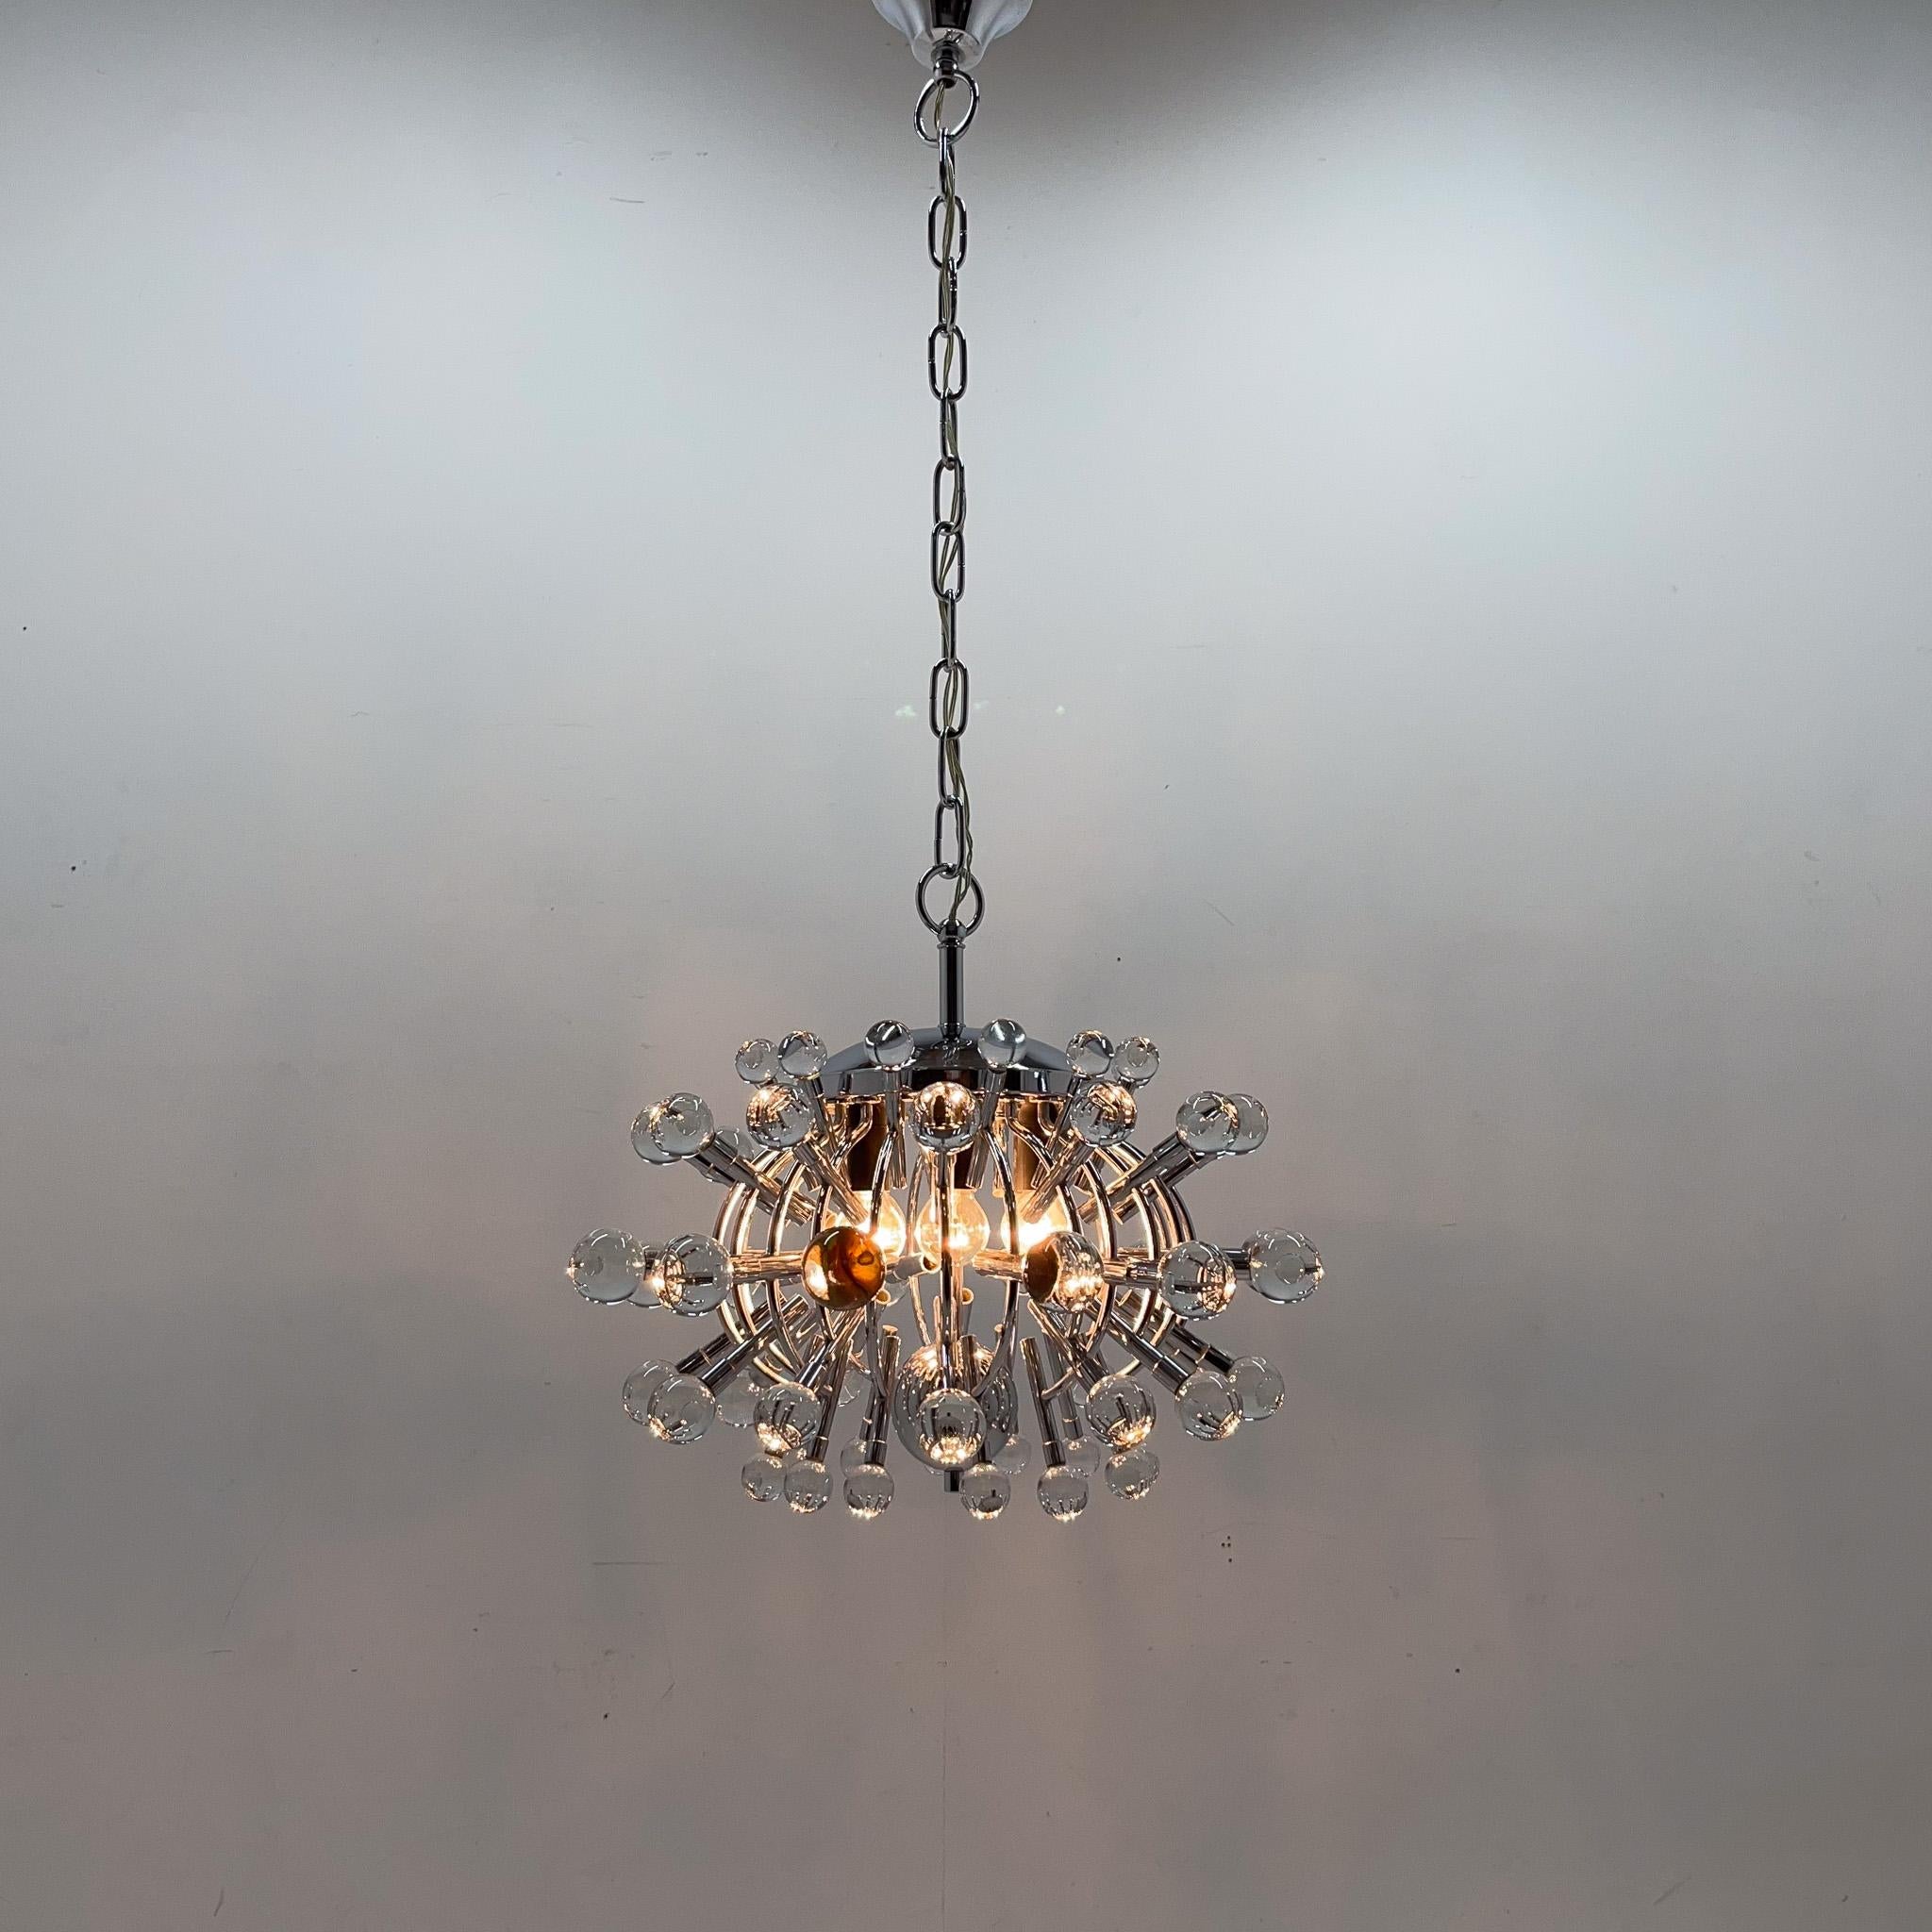 Unique Italian Space Age Chrome & Crystal Glass Chandelier, 1970s For Sale 5